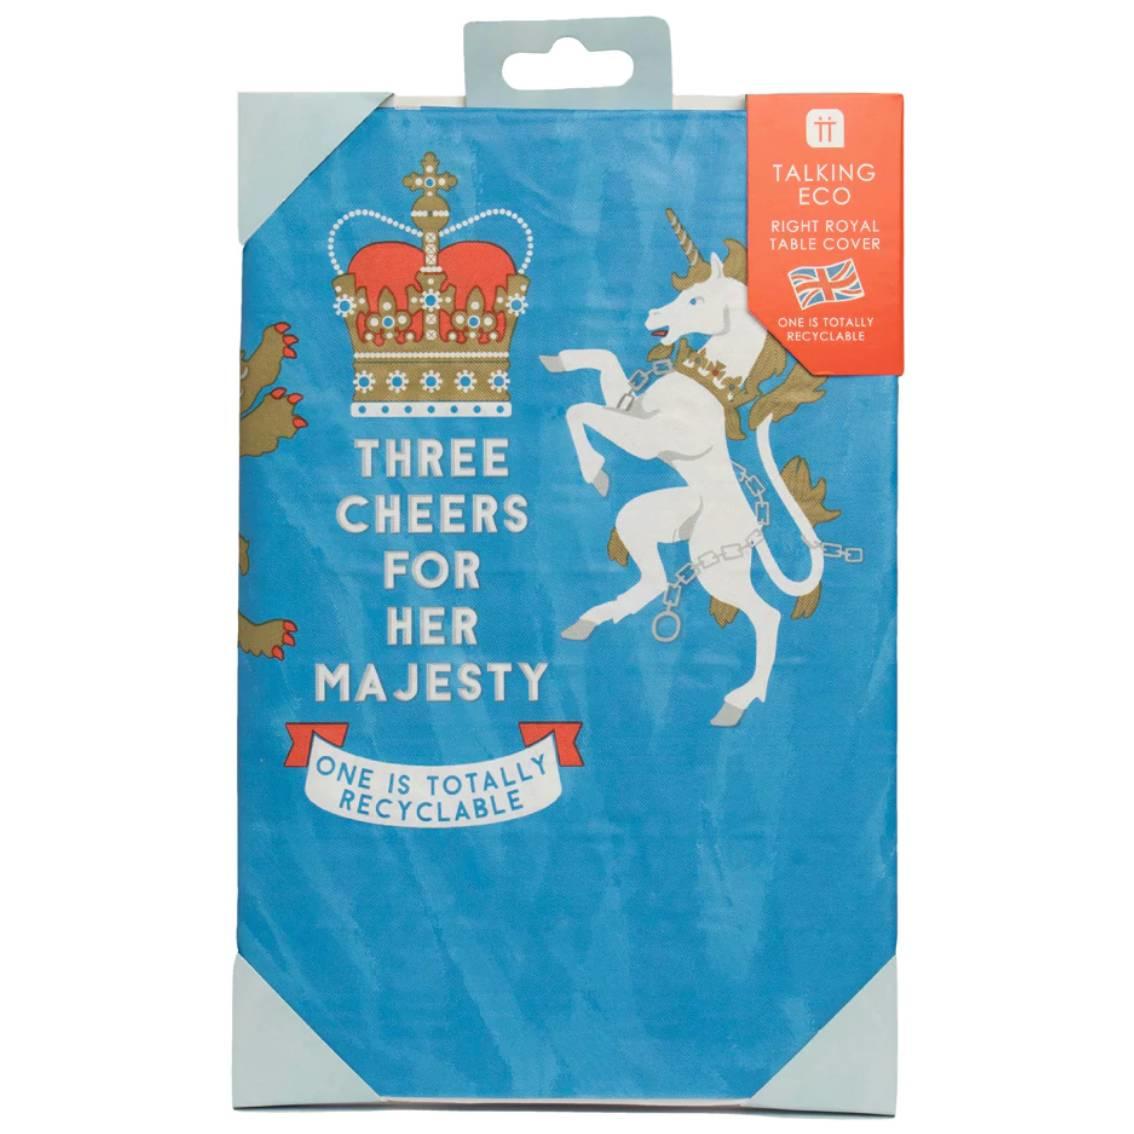 Right Royal Spectacle Tablecover by Talking Tables ROYAL-TCOVER available here at Karnival Costumes online party shop